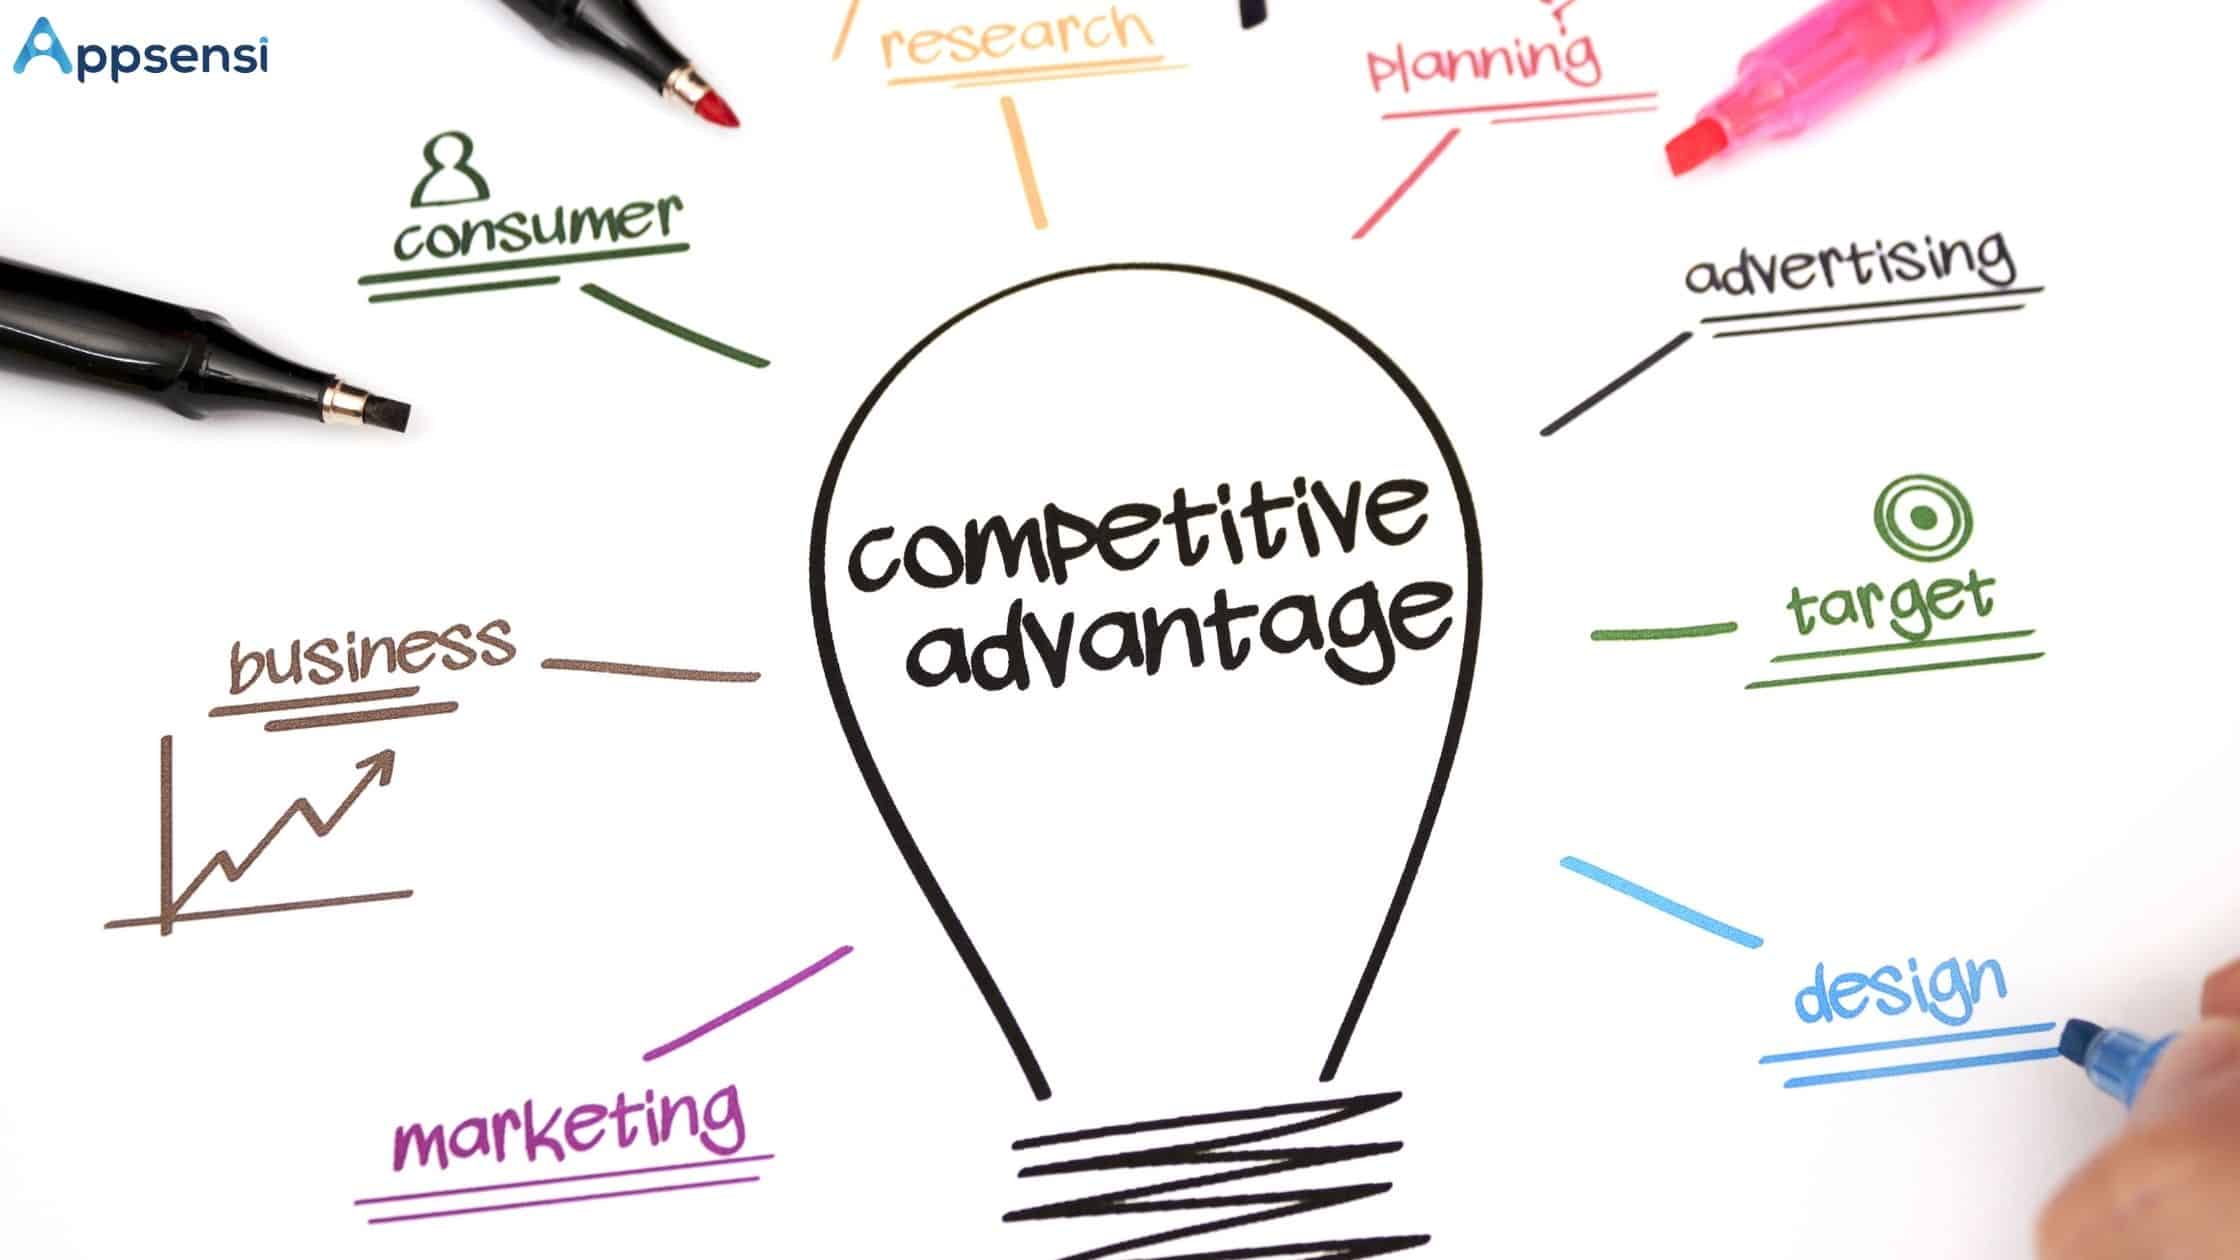 Knowing About Competitive Advantage for Your Business